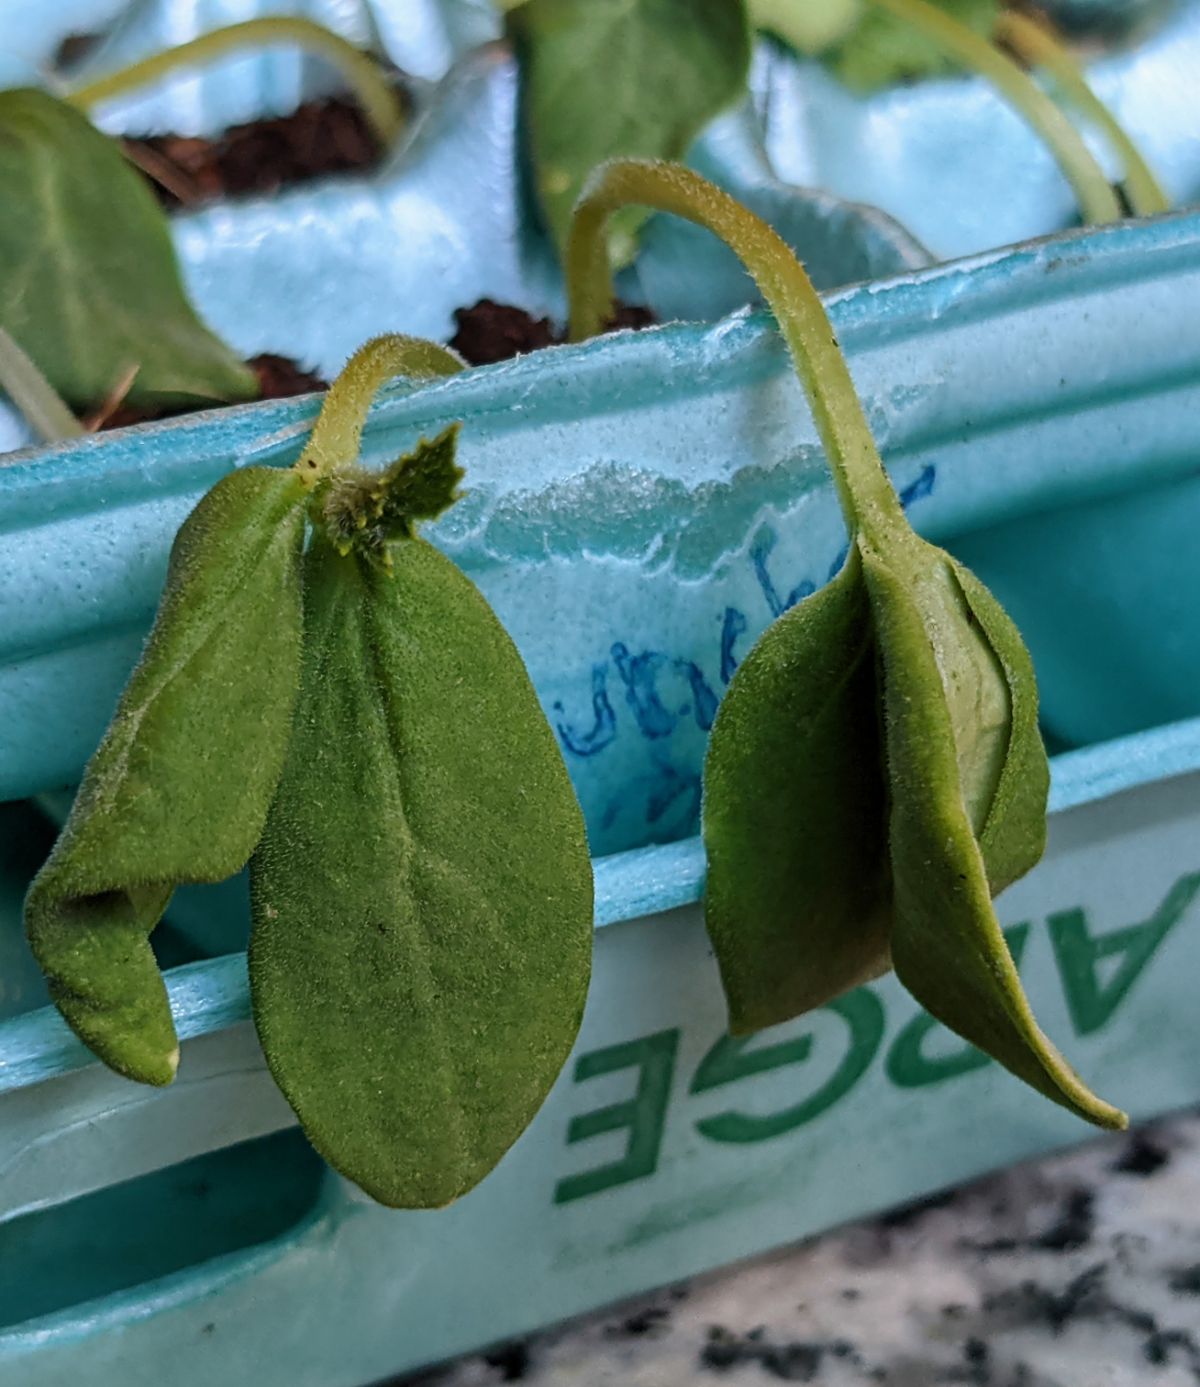 Droopy seedlings falling over on a turquoise egg carton